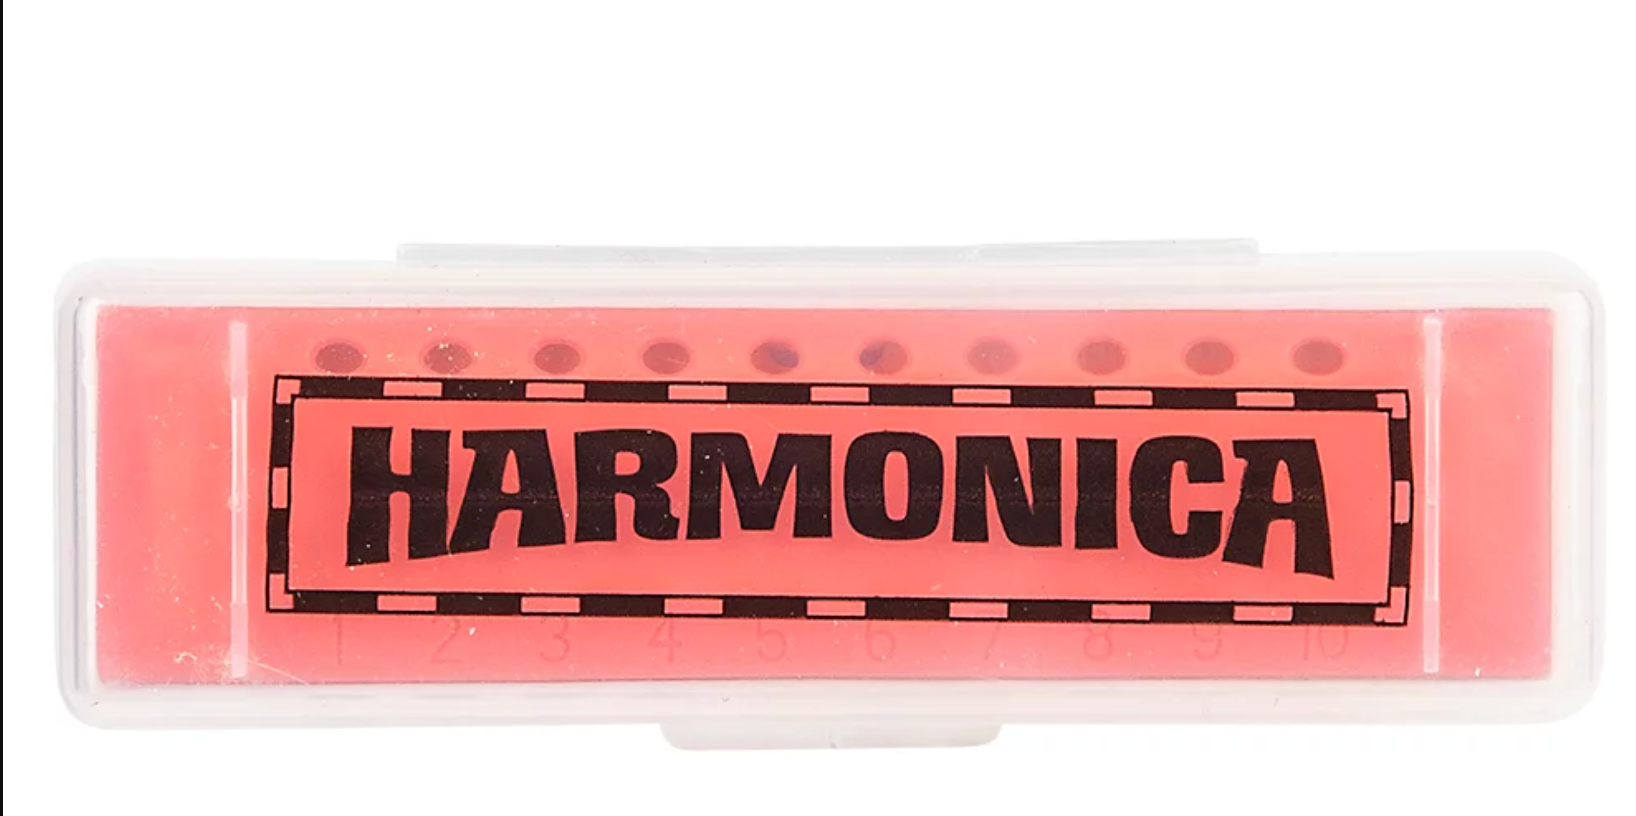 4" Harmonica in assorted colors one per order